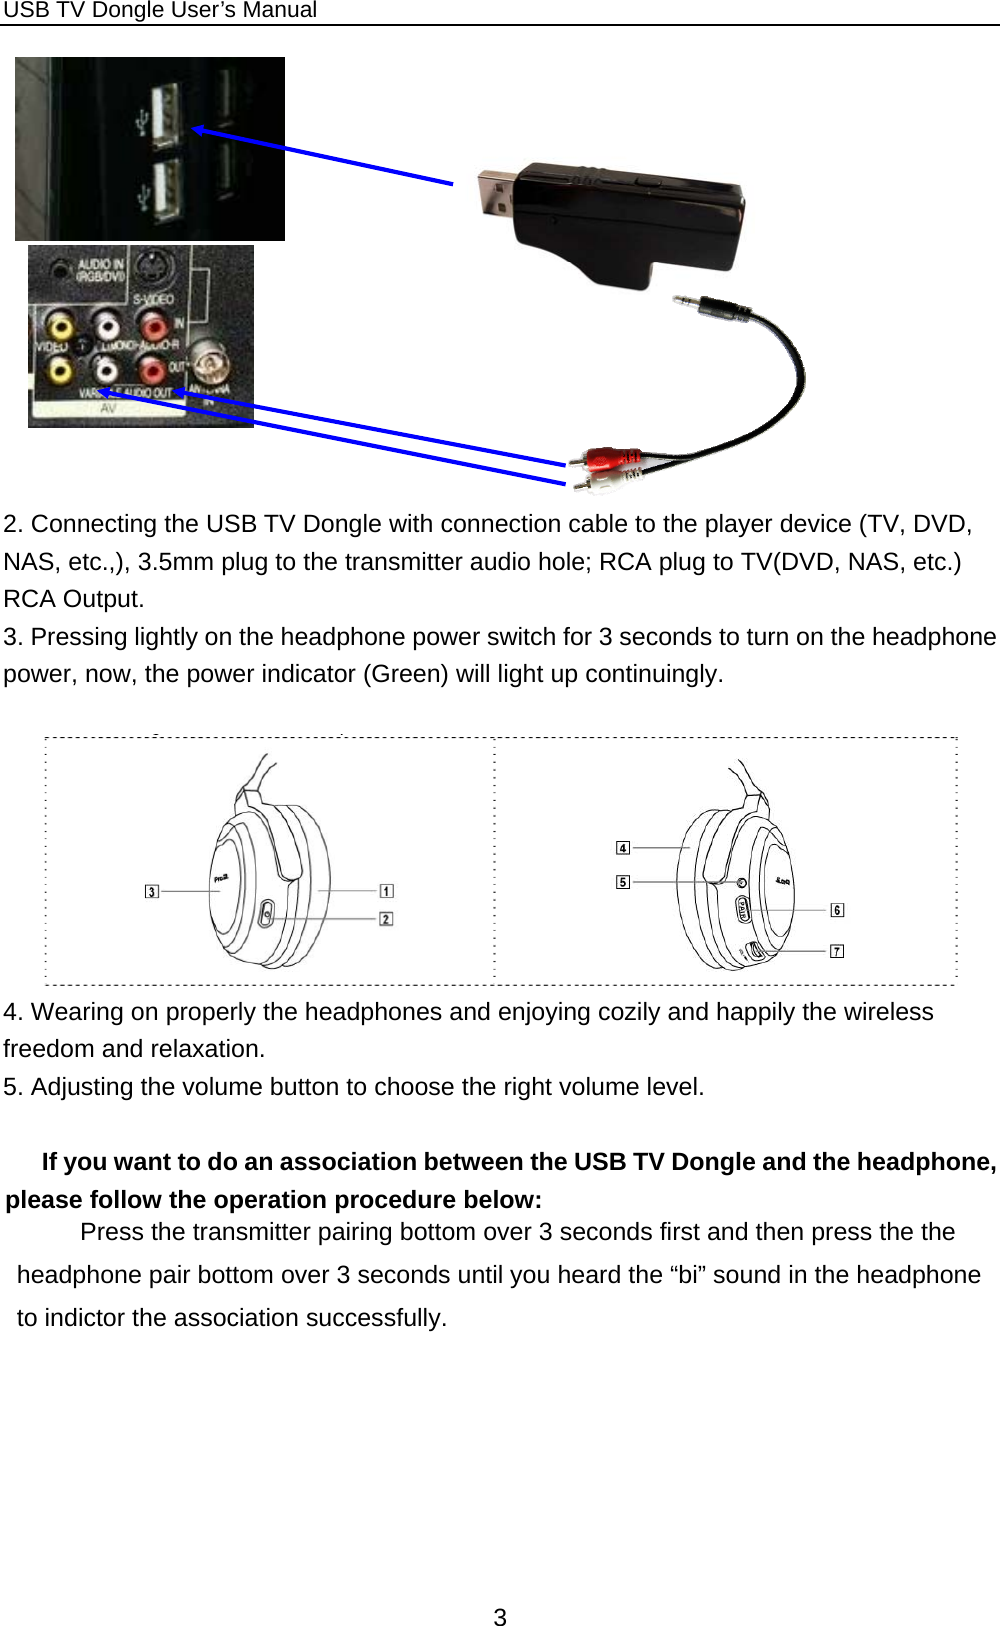 USB TV Dongle User’s Manual  3       2. Connecting the USB TV Dongle with connection cable to the player device (TV, DVD, NAS, etc.,), 3.5mm plug to the transmitter audio hole; RCA plug to TV(DVD, NAS, etc.) RCA Output.   3. Pressing lightly on the headphone power switch for 3 seconds to turn on the headphone power, now, the power indicator (Green) will light up continuingly.   4. Wearing on properly the headphones and enjoying cozily and happily the wireless freedom and relaxation.   5. Adjusting the volume button to choose the right volume level.  If you want to do an association between the USB TV Dongle and the headphone, please follow the operation procedure below: Press the transmitter pairing bottom over 3 seconds first and then press the the headphone pair bottom over 3 seconds until you heard the “bi” sound in the headphone to indictor the association successfully.   